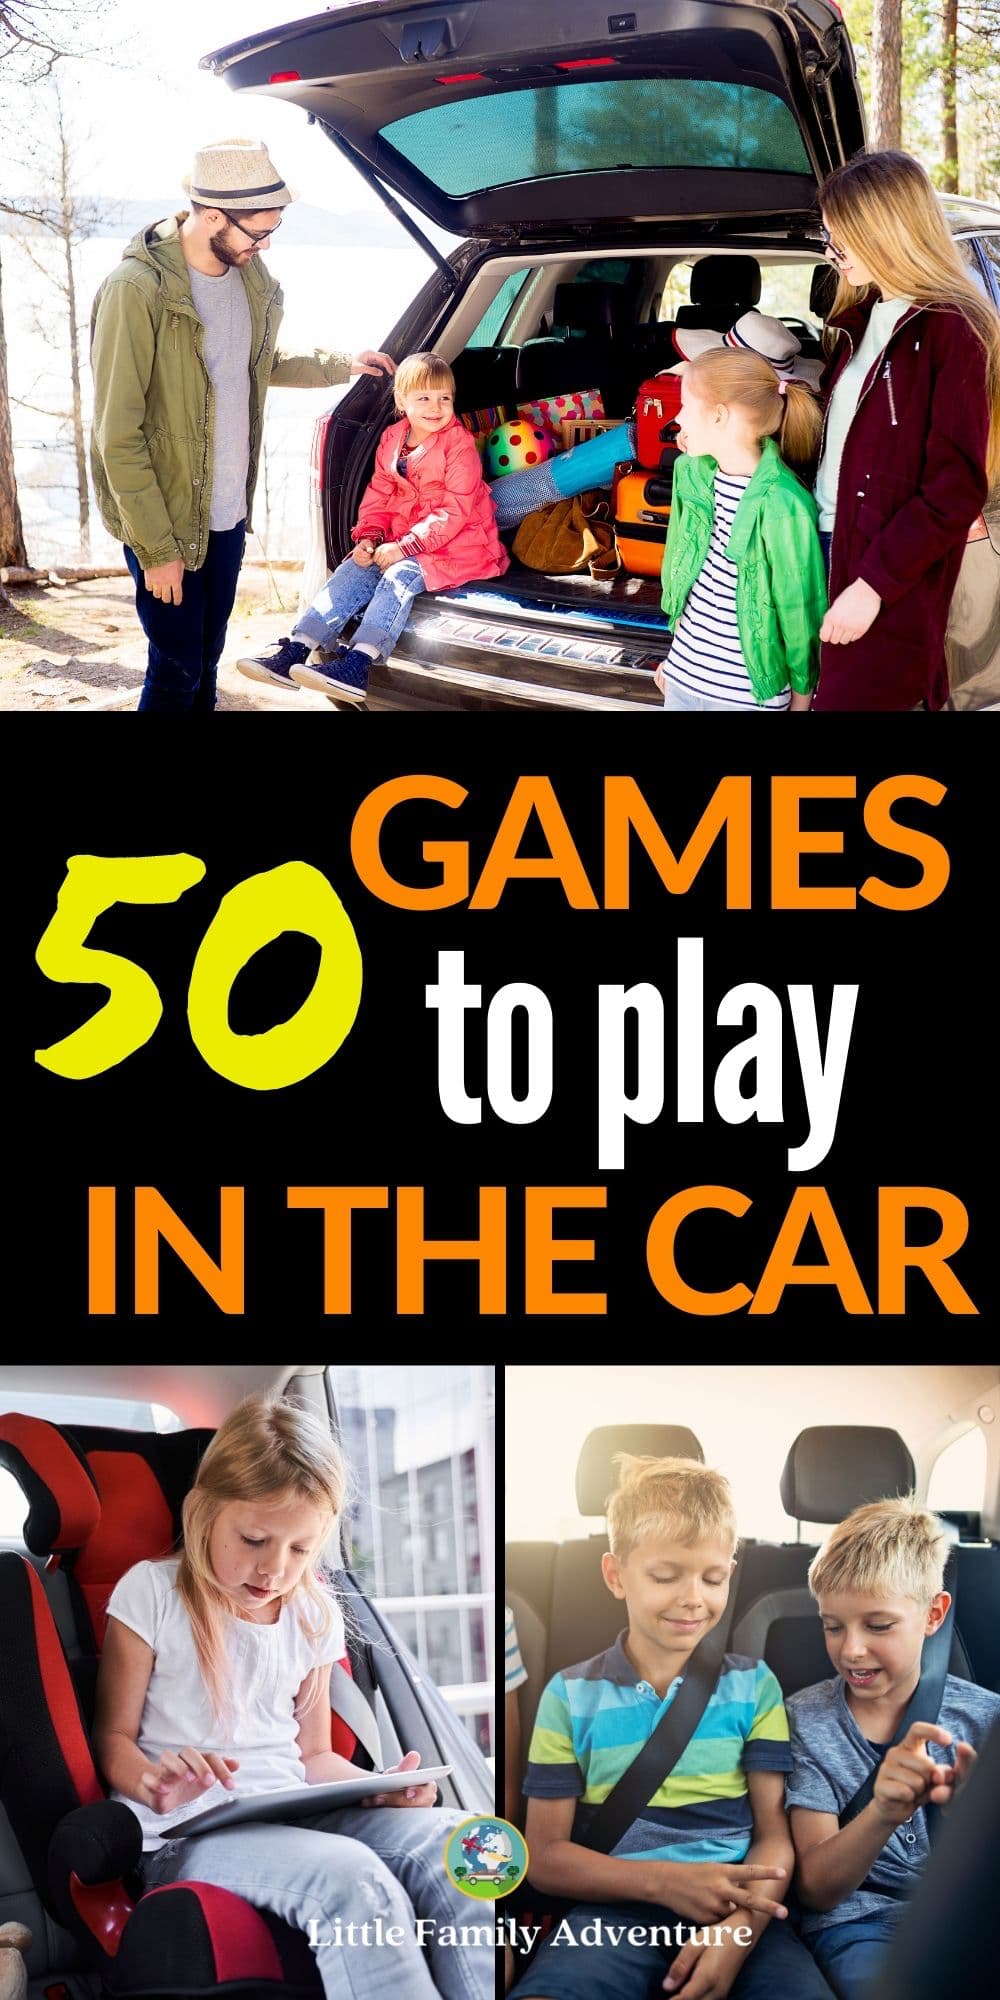 banish-dull-drives-with-these-50-fun-road-trip-games-to-play-in-the-car